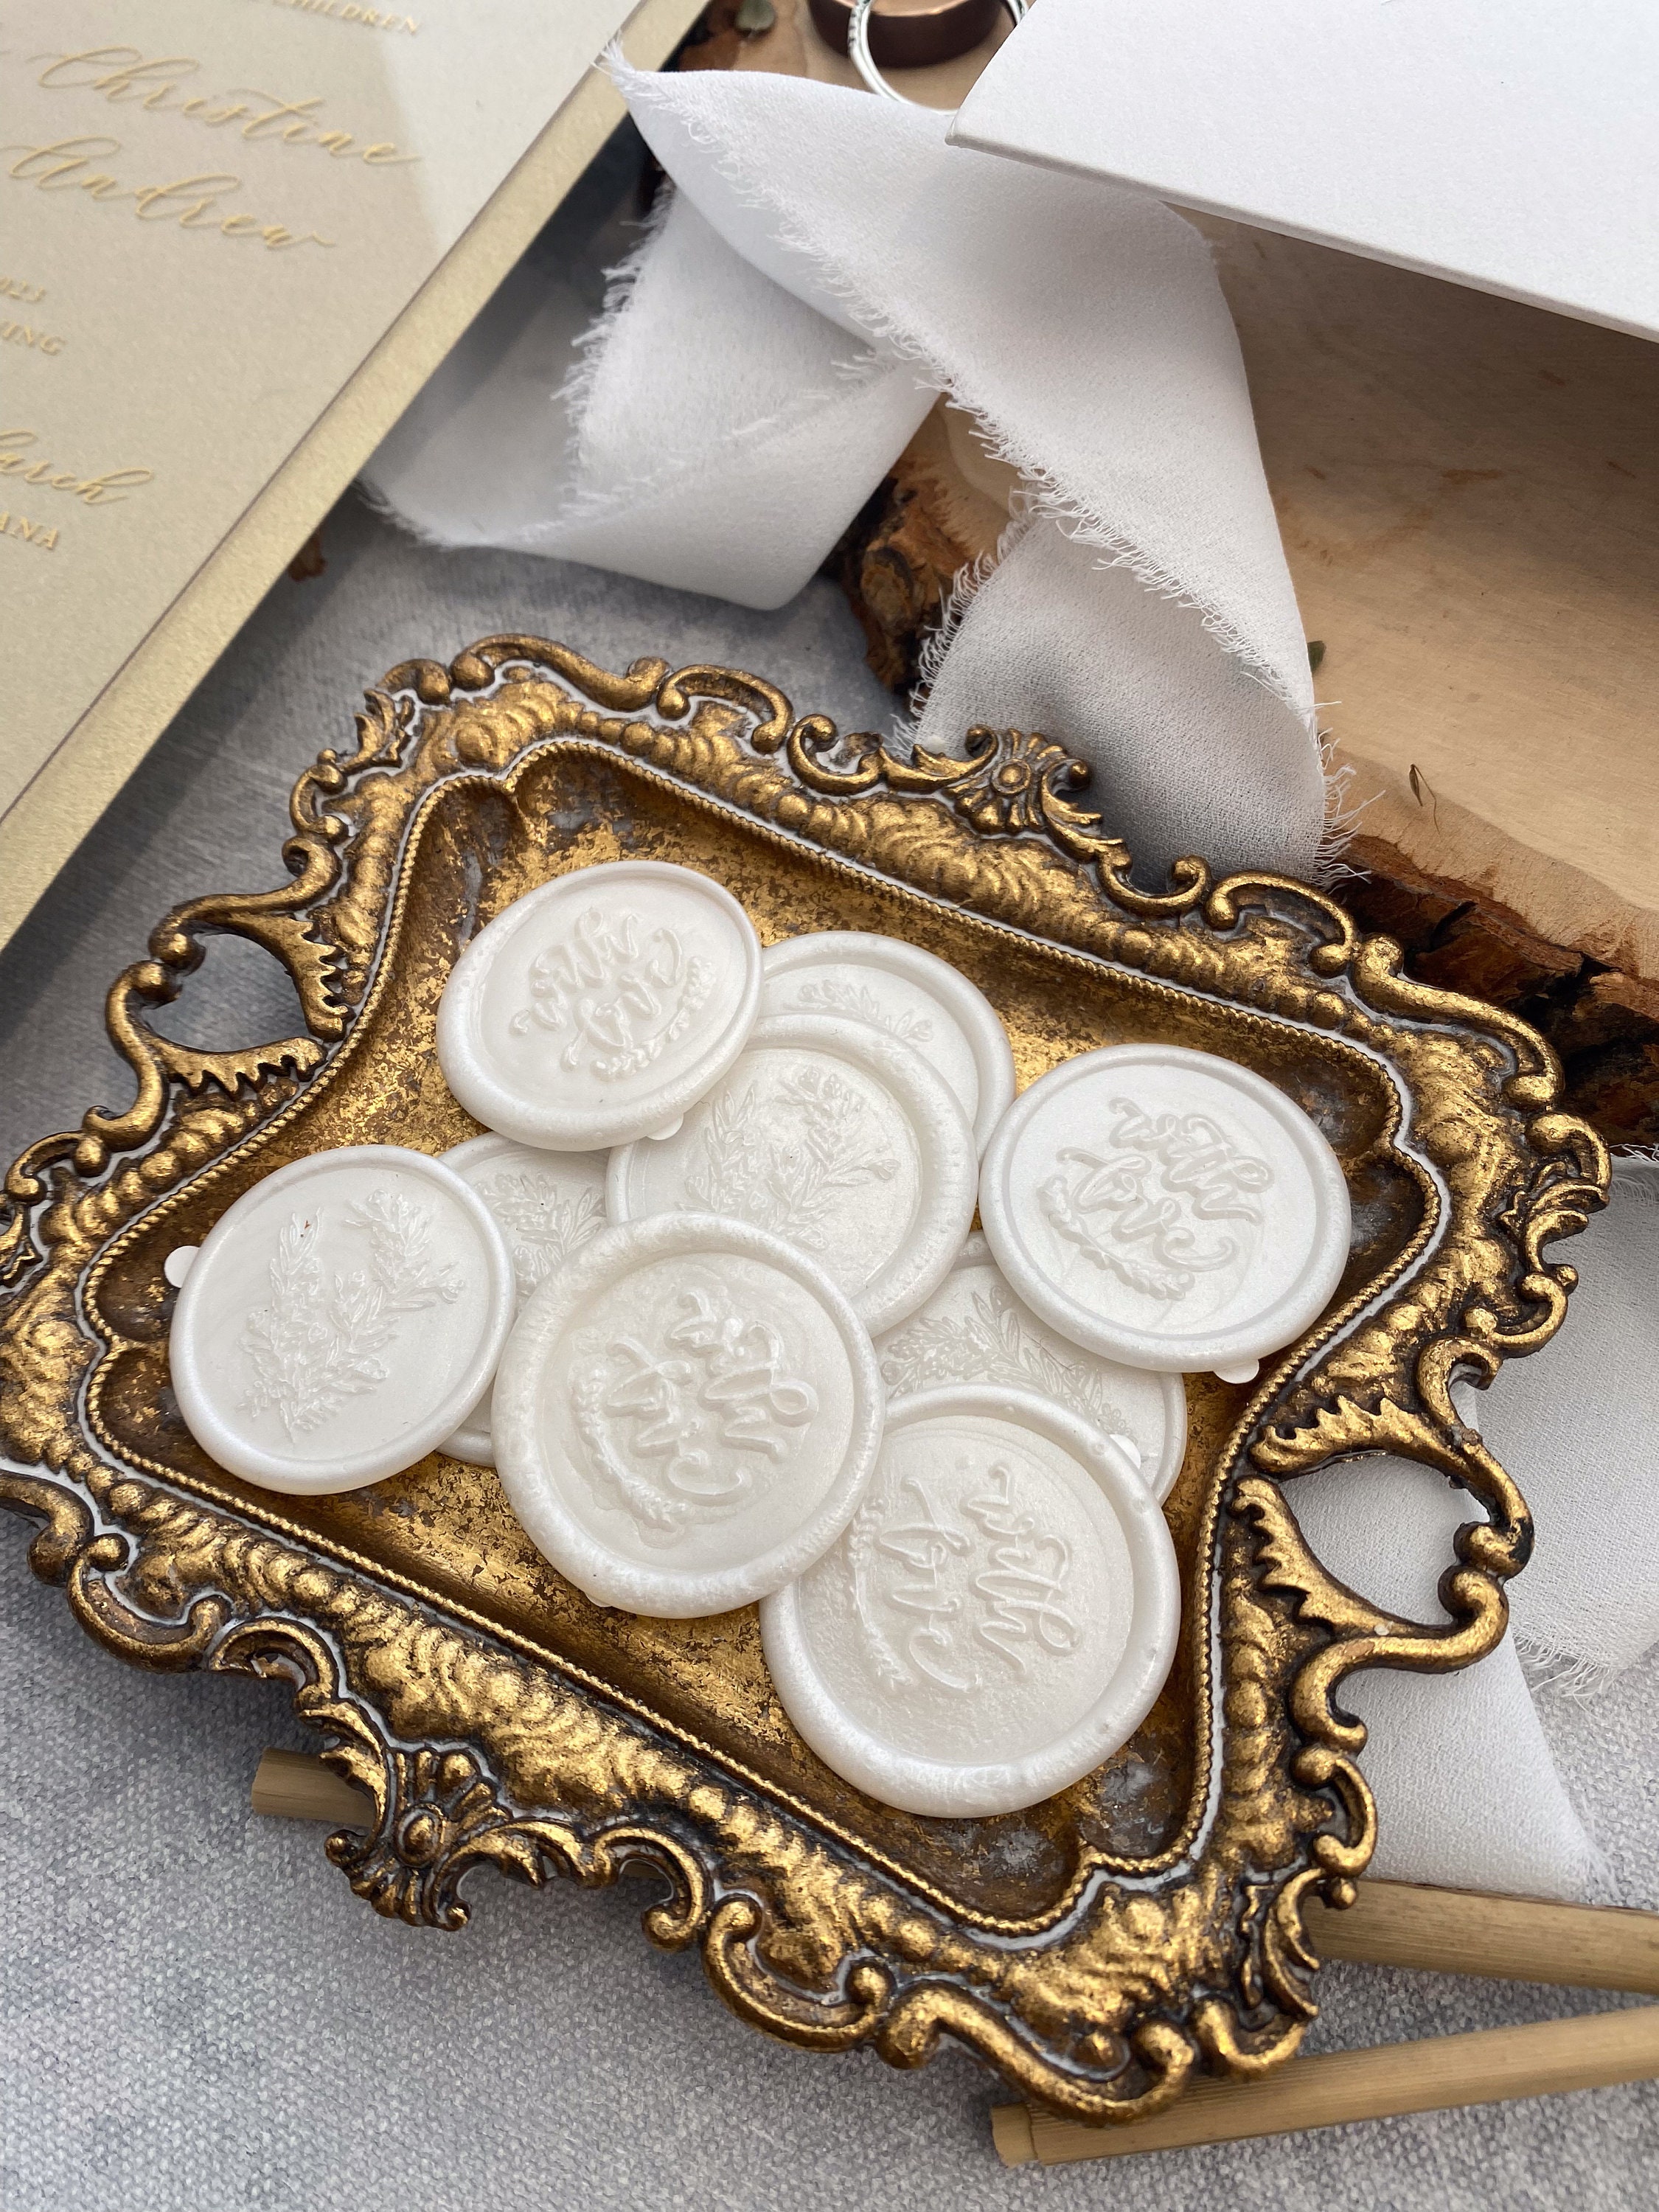 Pearl White Adhesive Wax Seals, Wax Seals Stickers Wax Seals for Envelopes  or Wedding Invitations Jamies Pretty Peony 